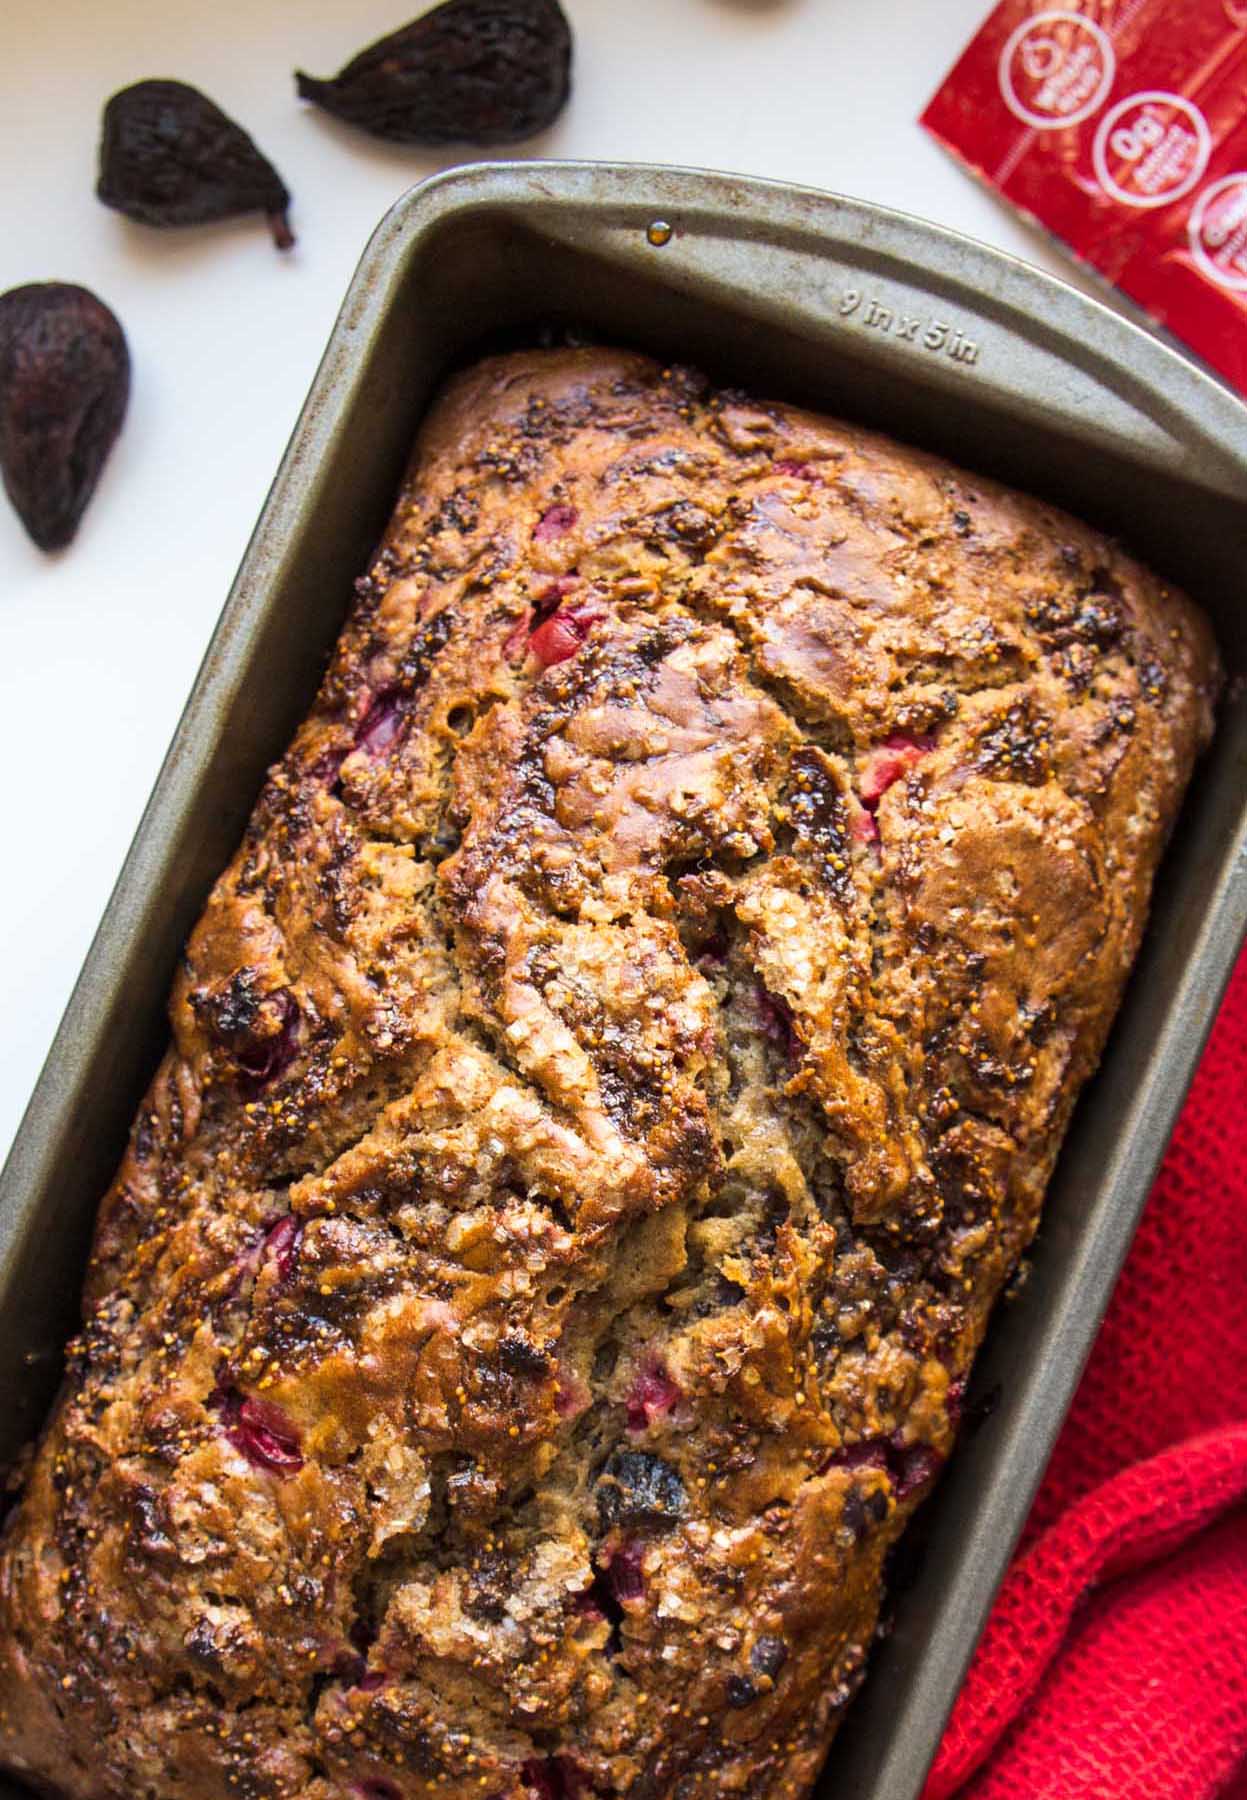 Our cranberry quickbread marries decadence & a smart ingredient swap in holiday baking. Bake cranberry orange quickbread for a homemade gift.